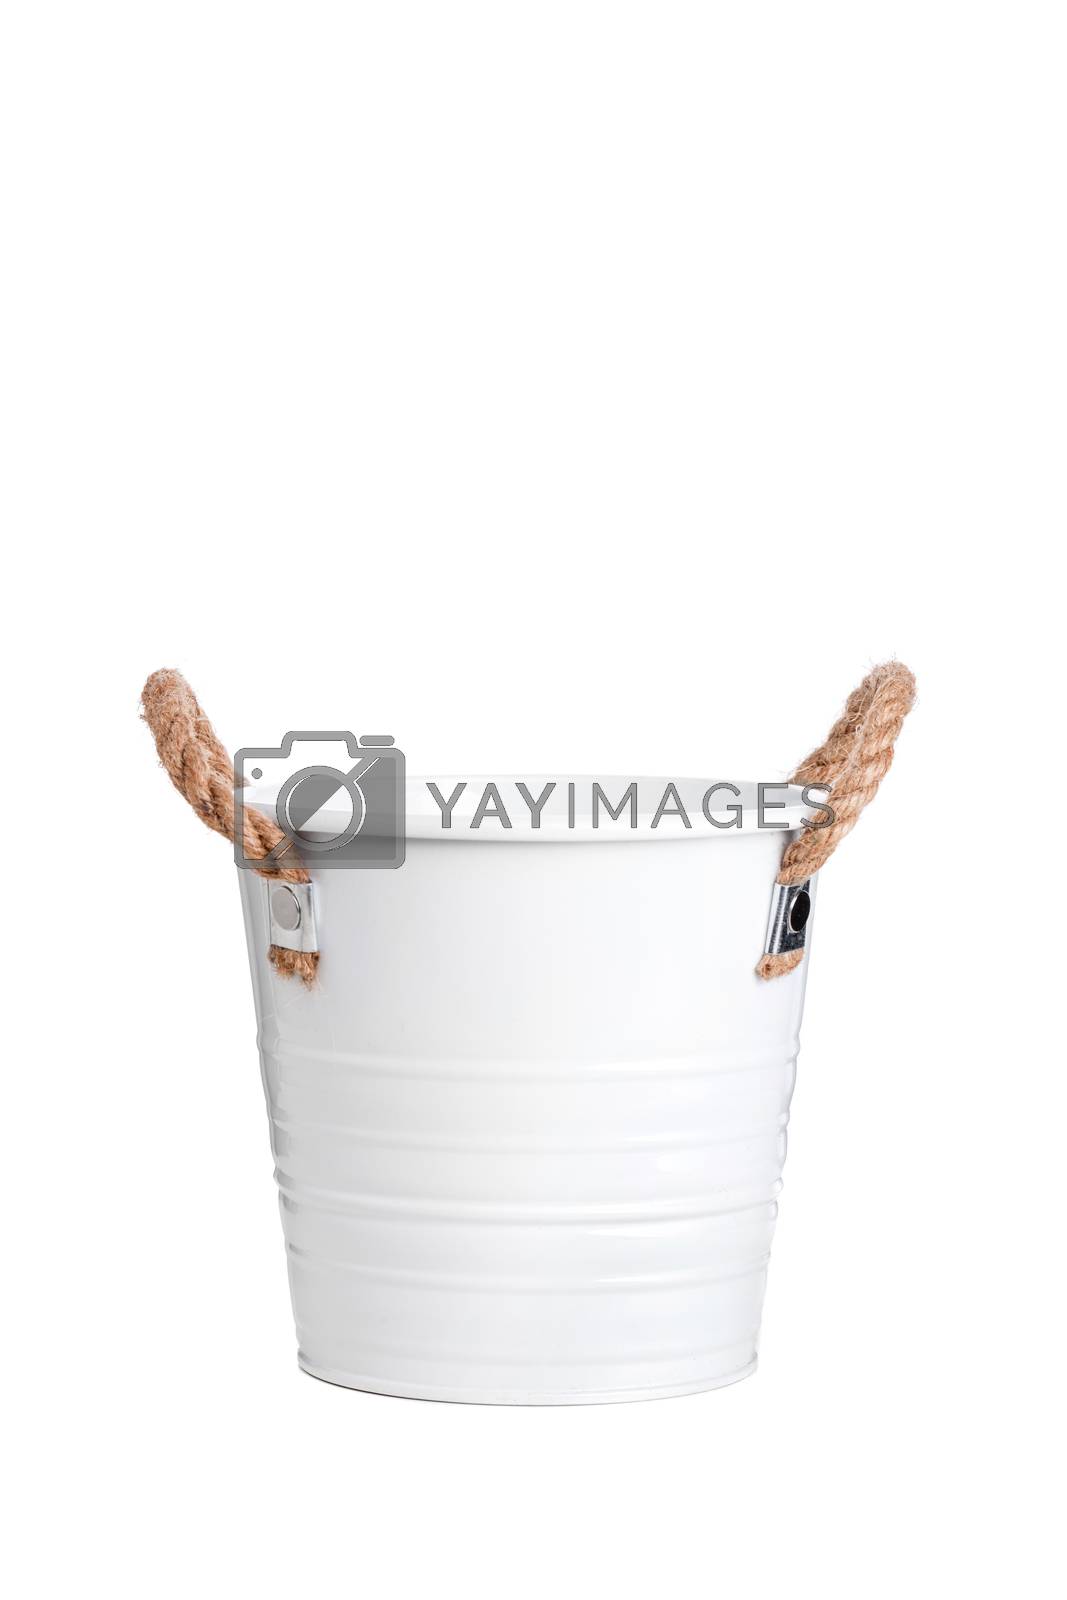 Royalty free image of white bucket with rope handles by kokimk